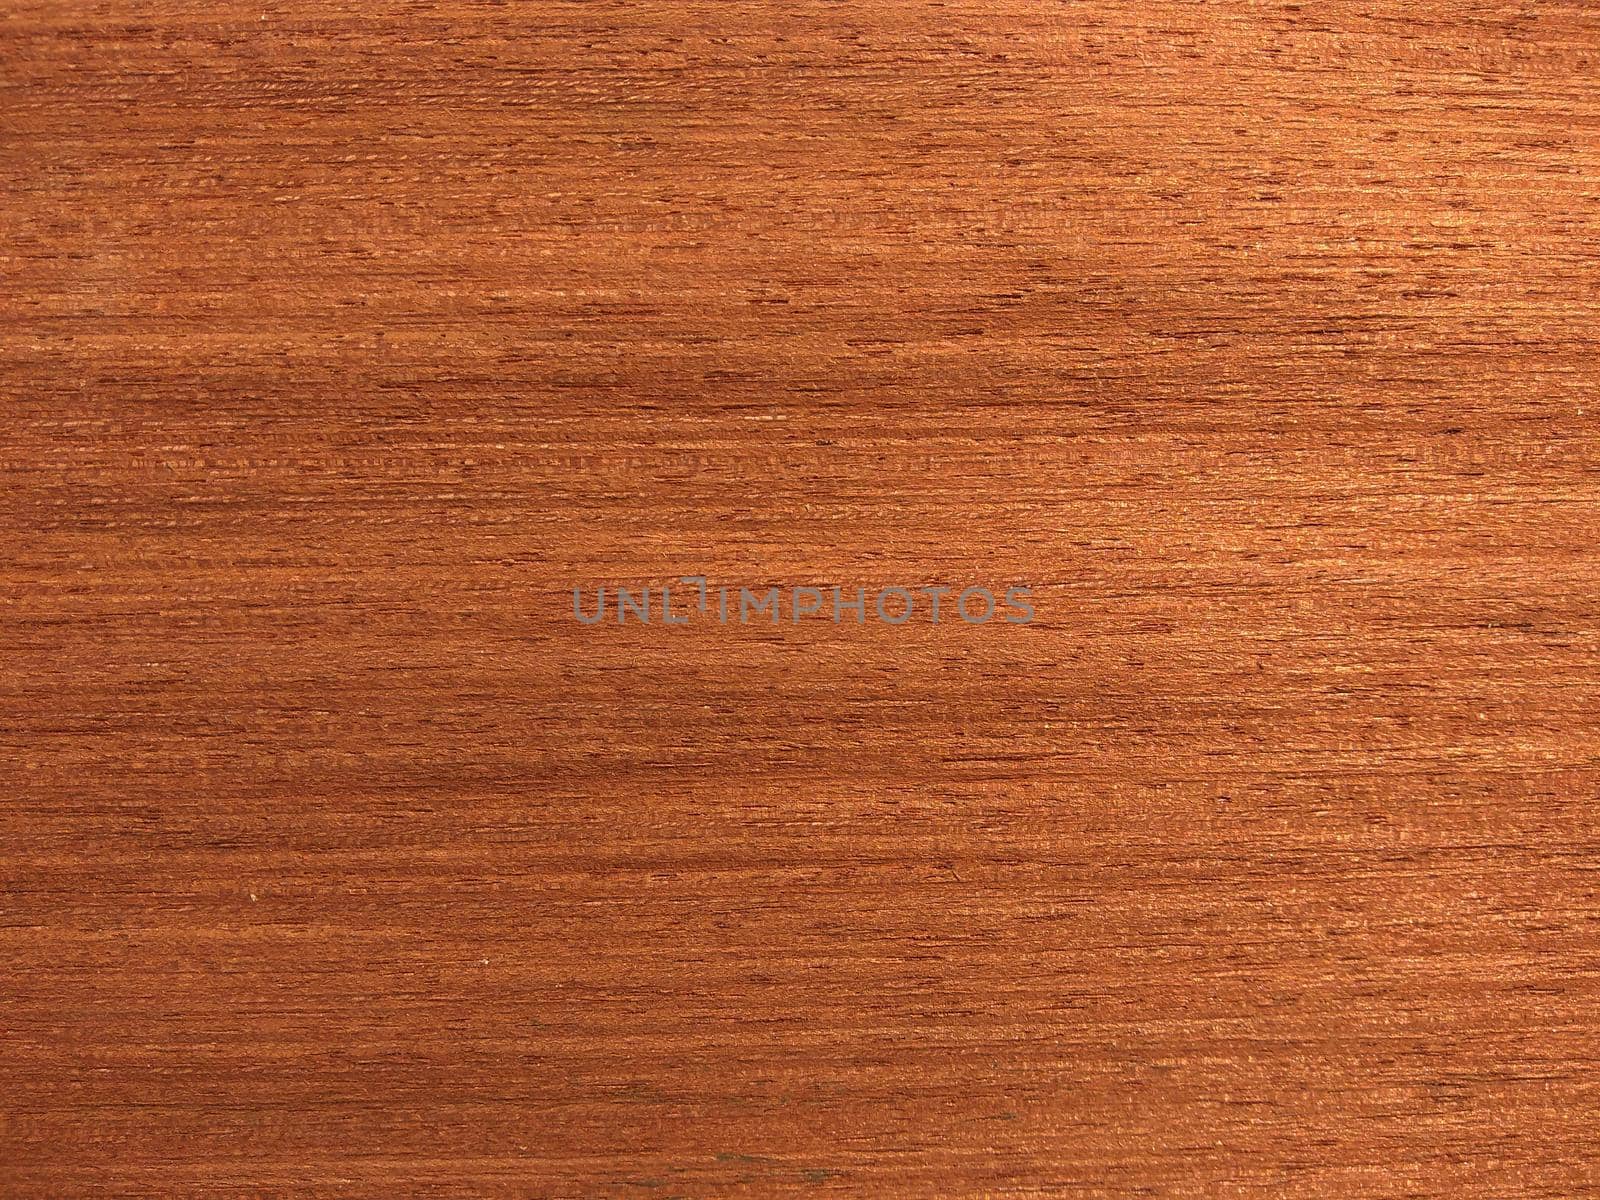 Natural red mahogany wood texture background. veneer surface for interior and exterior manufacturers use.